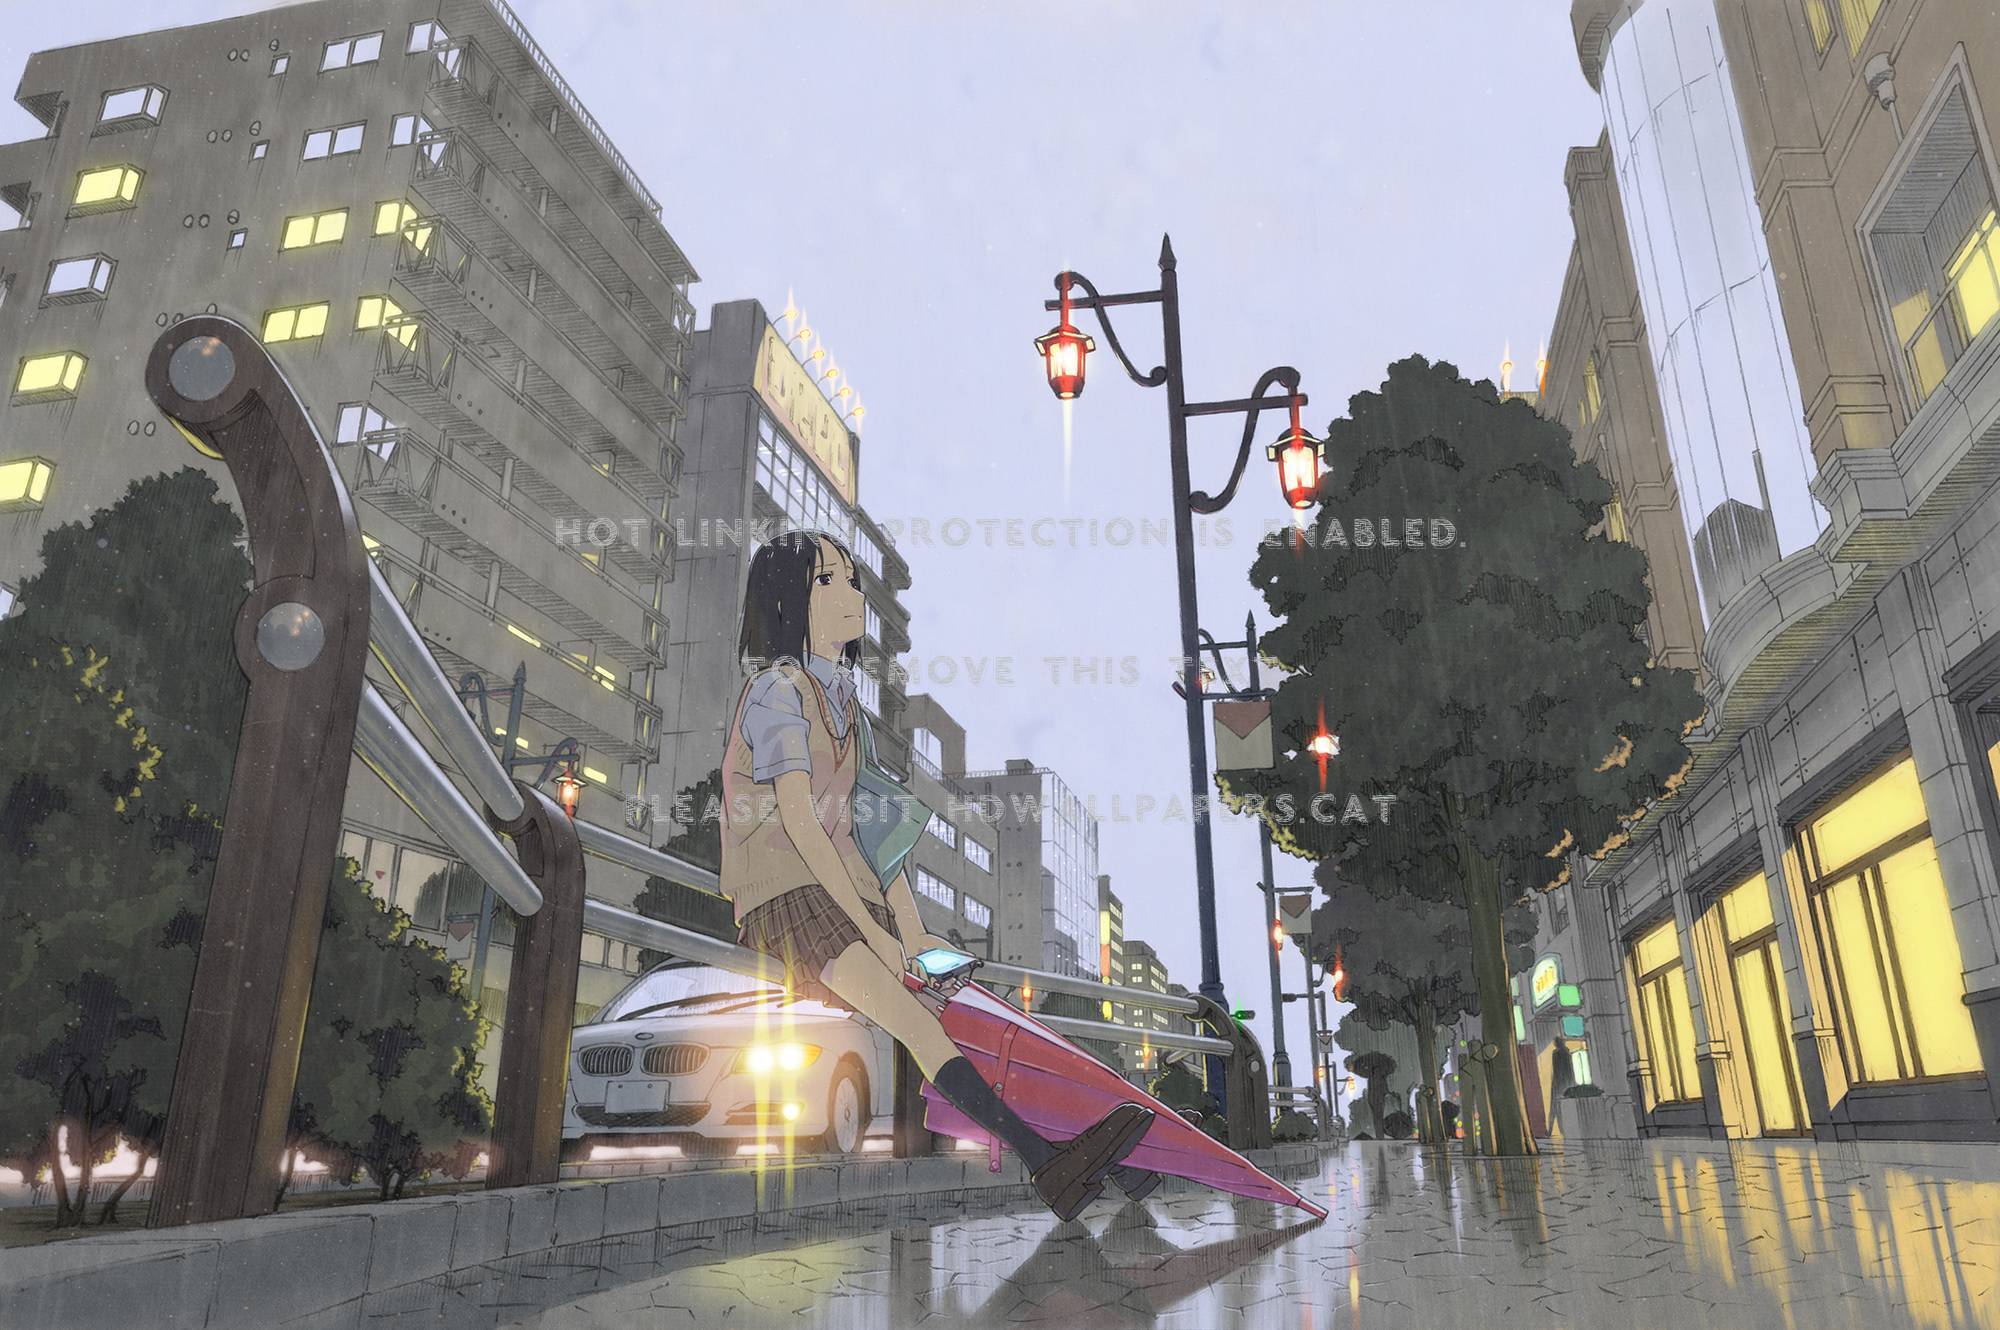 Rainy Day Anime Wallpapers - Top Free Rainy Day Anime Backgrounds